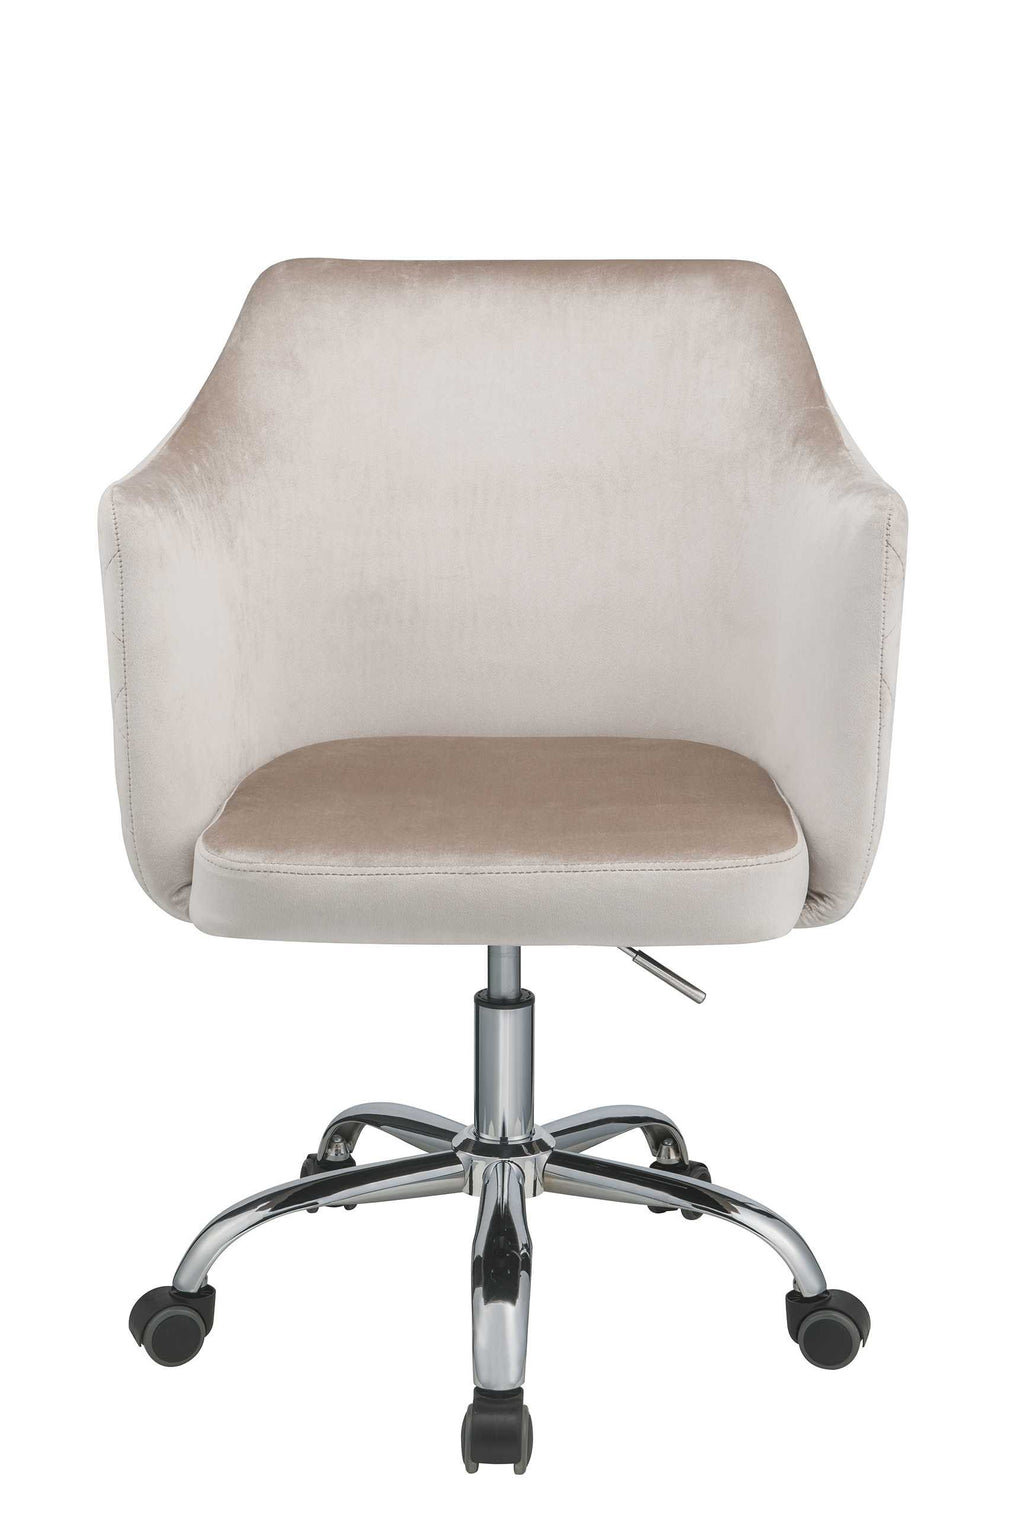 Champagne Fabric Seat Swivel Adjustable Task Chair Fabric Back Steel Frame - 99fab 